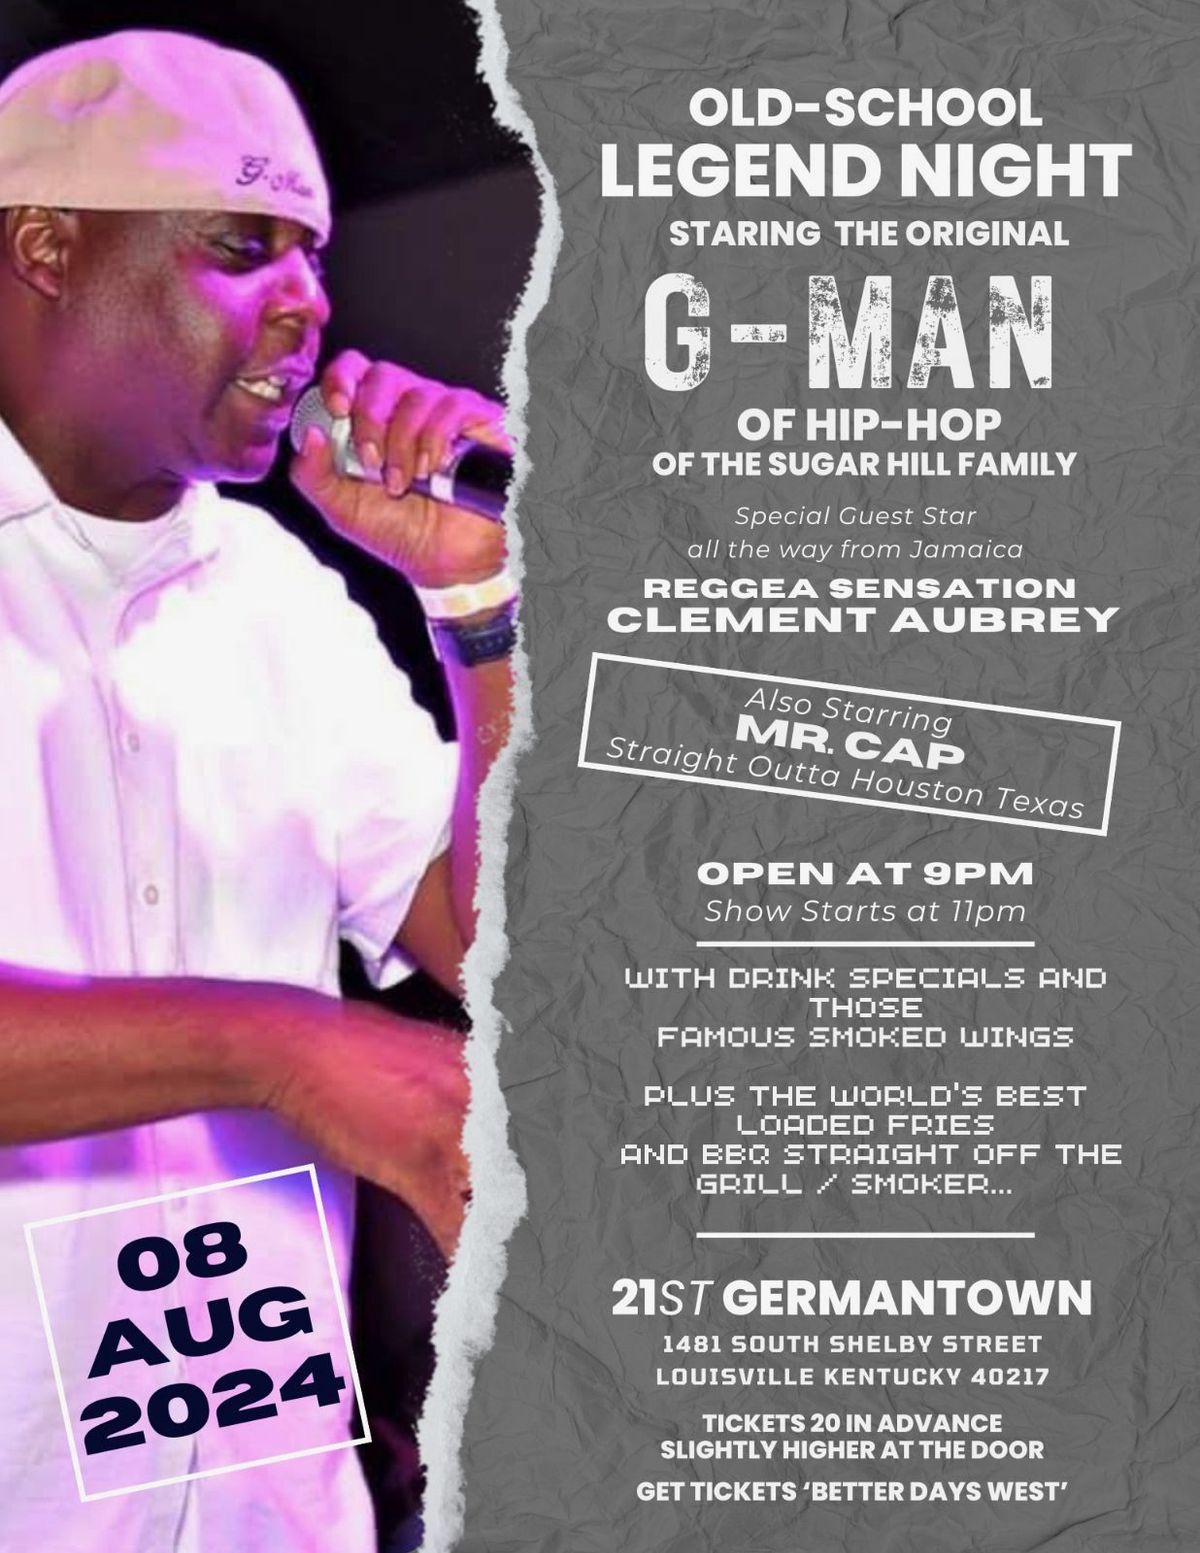 Old School Legend Night Starring The Original G-Man of Hip-Hop of the Sugar Hill Family